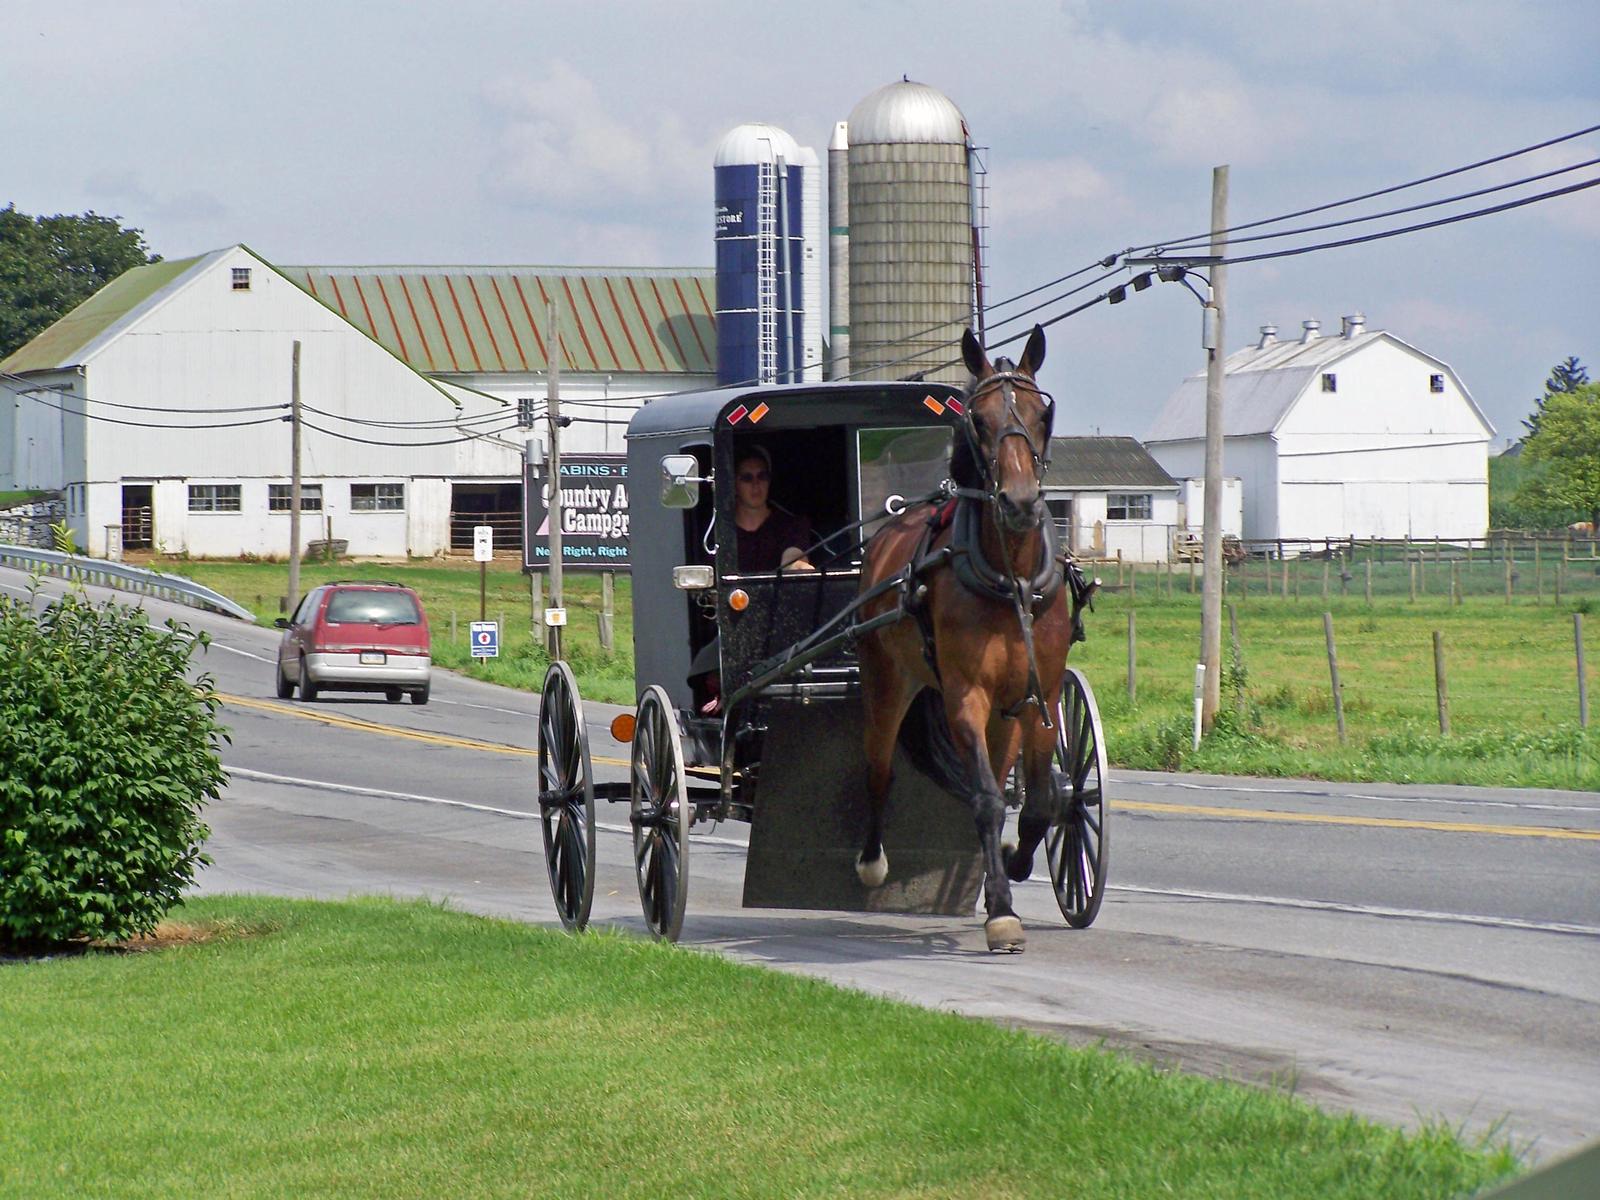 Very popular images: Amish Country